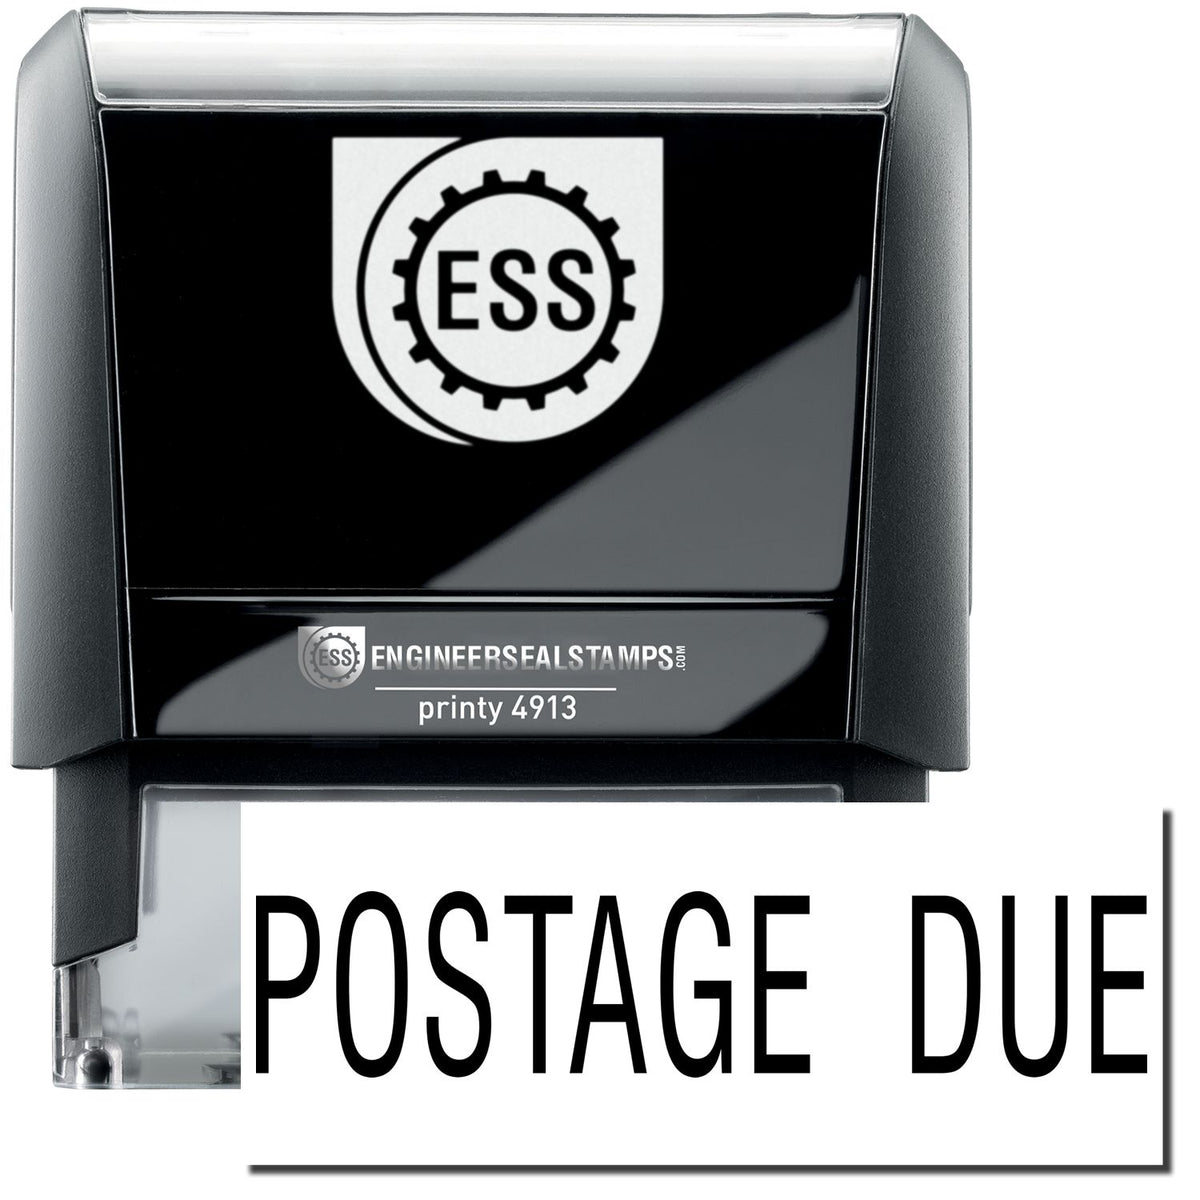 A self-inking stamp with a stamped image showing how the text &quot;POSTAGE DUE&quot; in a large font is displayed by it after stamping.